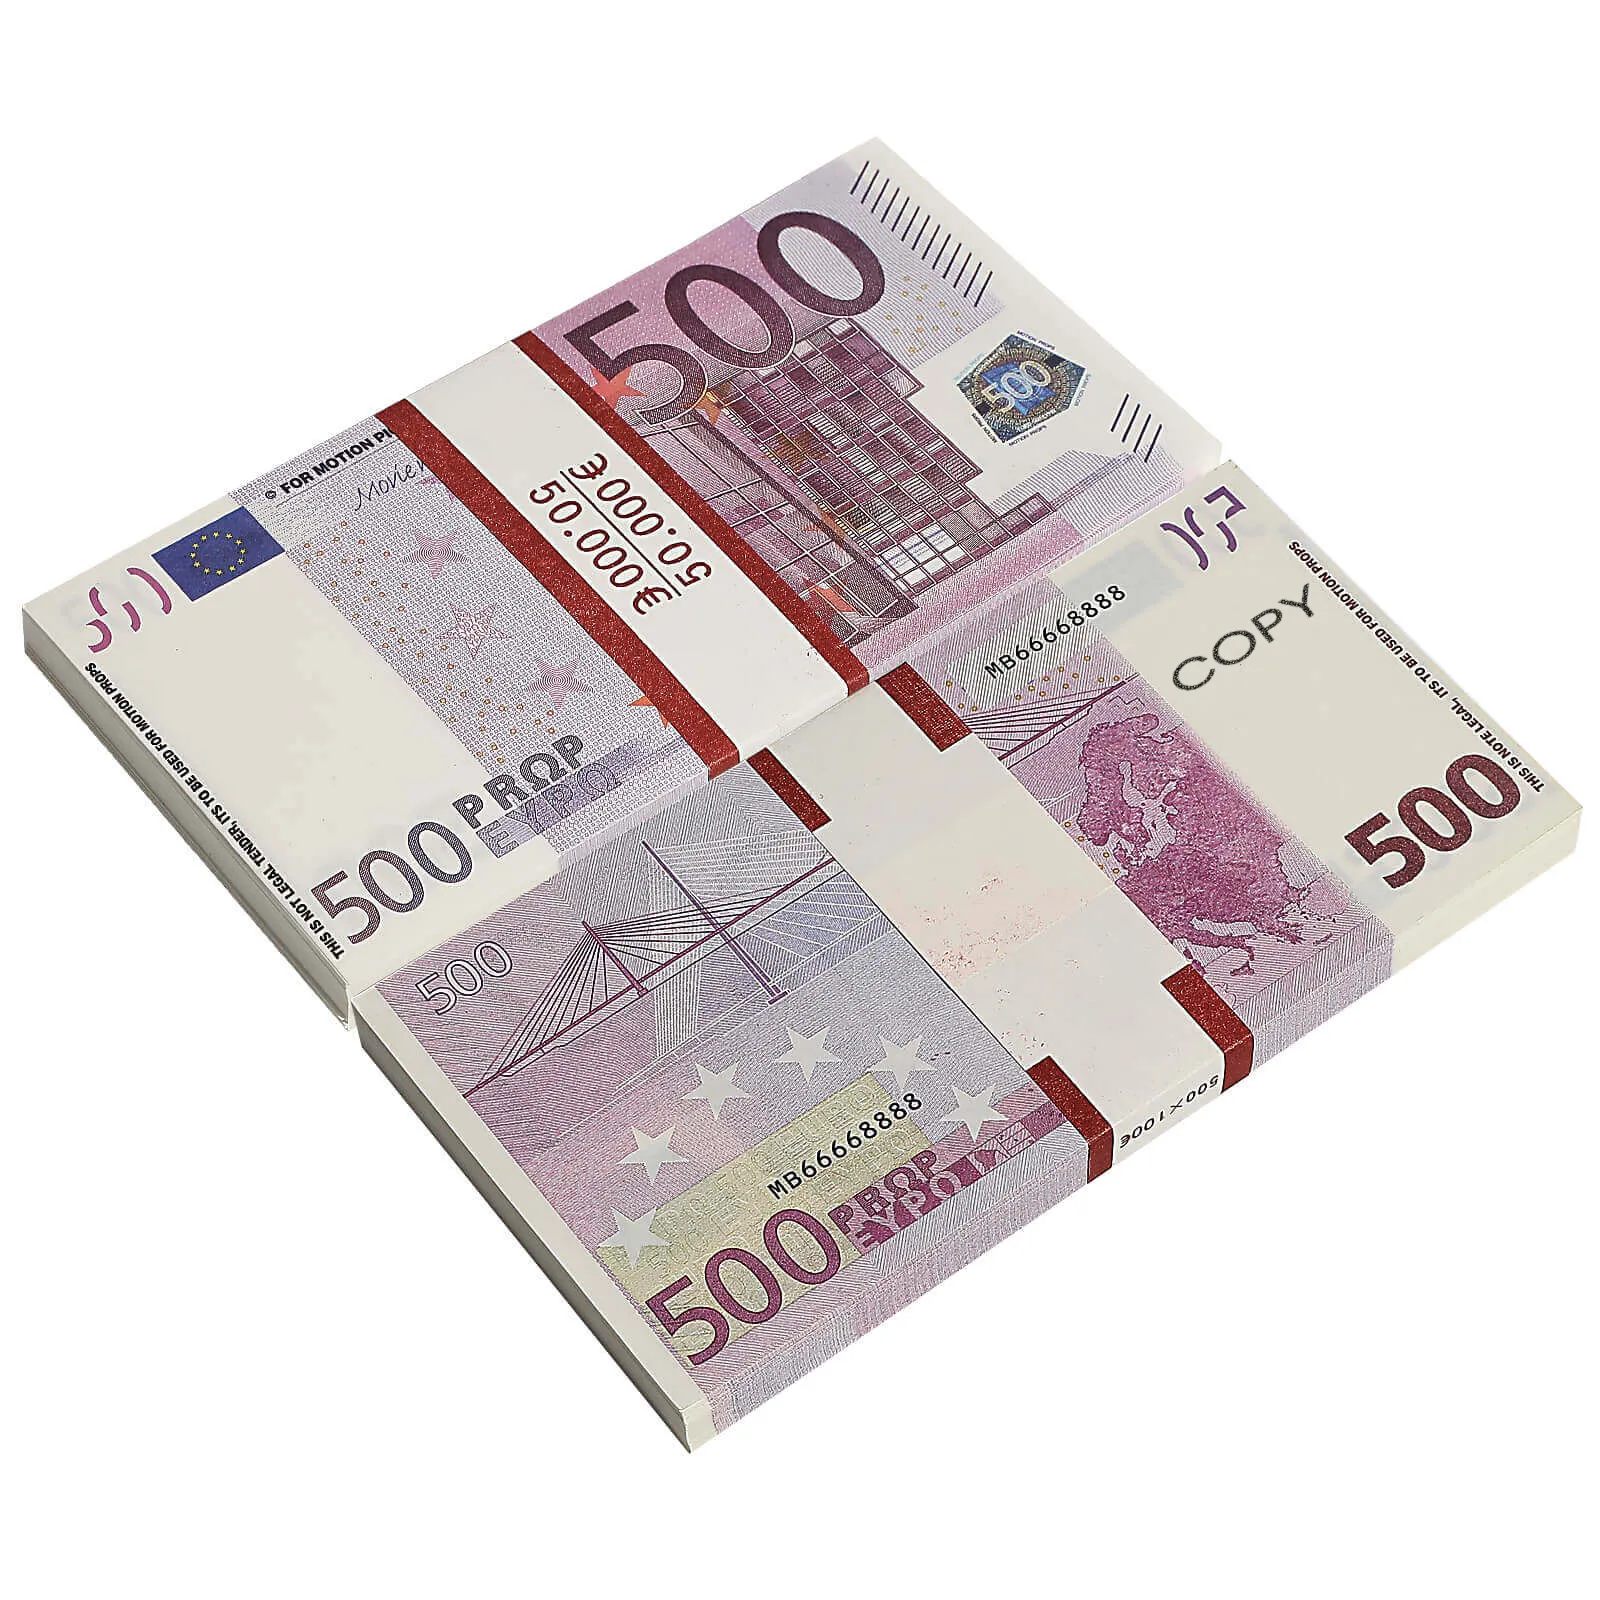 Paper Money 500 Euro Toy Dollar Bills réaliste Impression complète 2 SAFSE PLAK Bill Kids Party and Movie Props Fake Euro Pranks for Adults